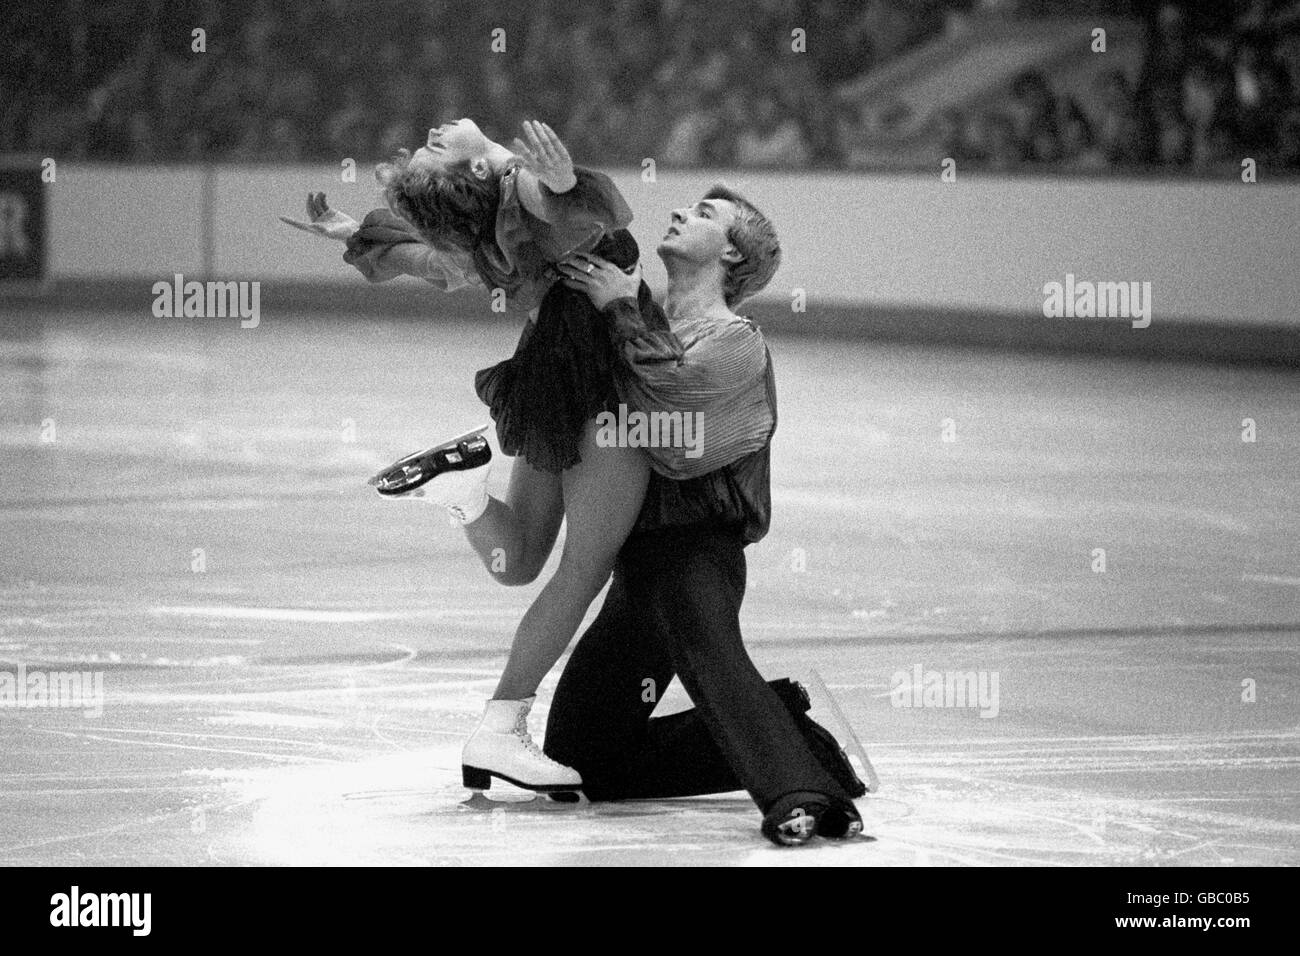 British World Ice Dance champions Jayne Torvill and Christopher Dean during their free dance routine to the music of Ravel's Bolero when it was first seen, after rehearsals in secret. Stock Photo